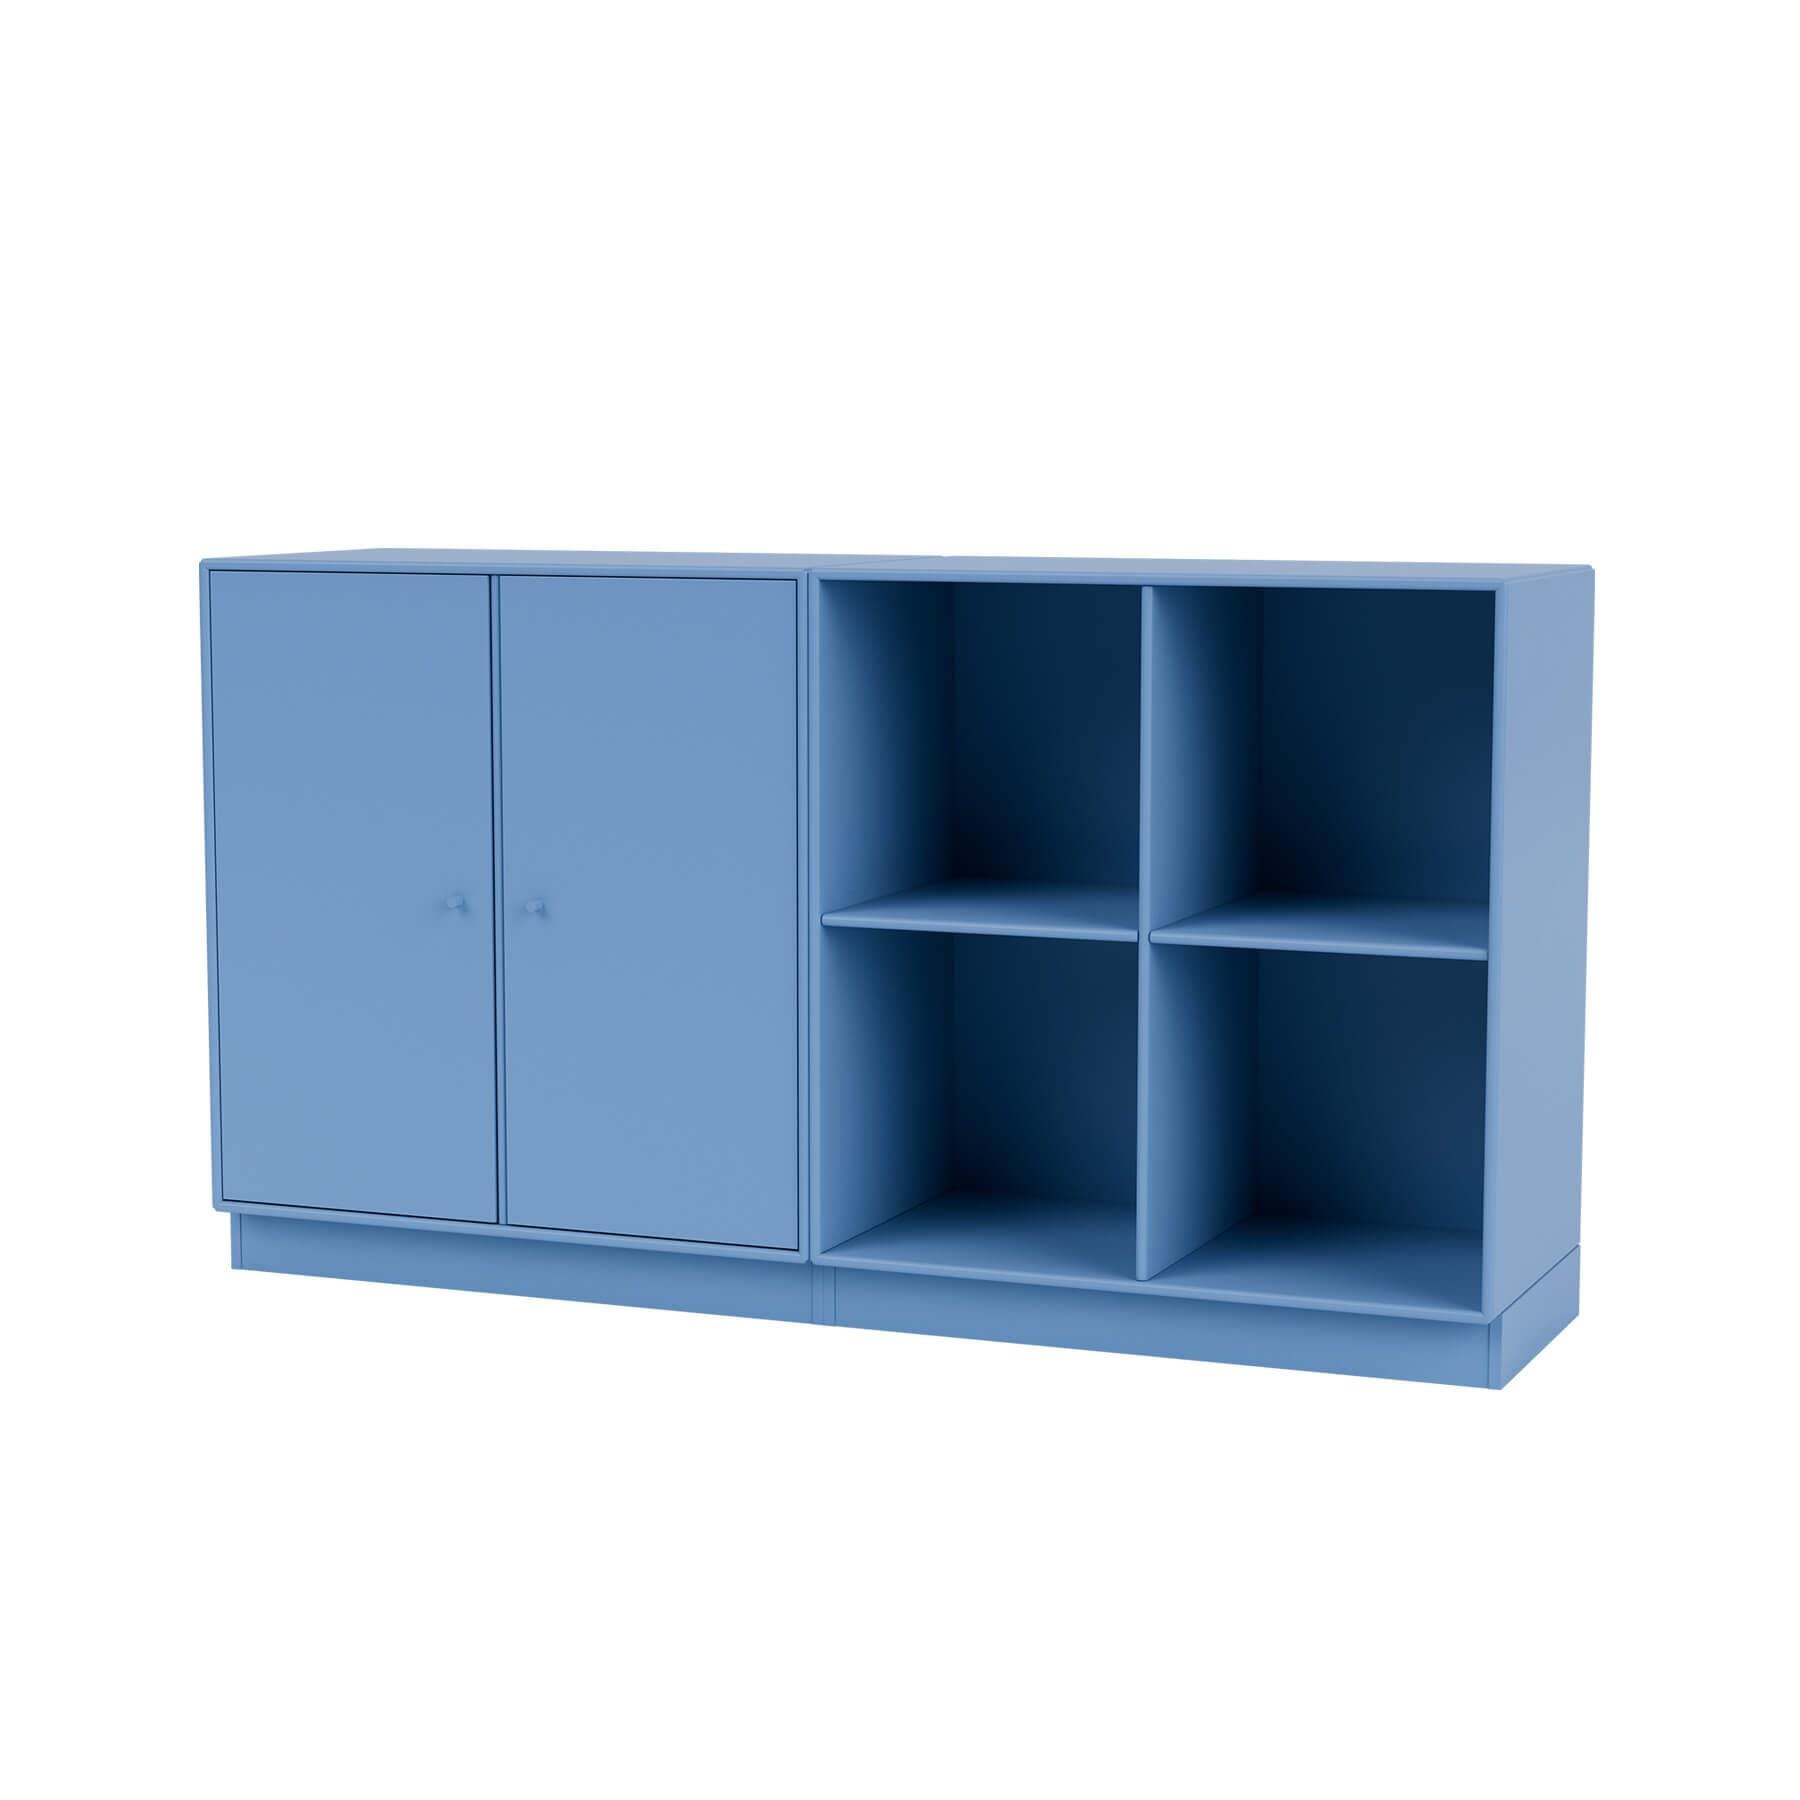 Montana Pair Classic Sideboard Azure Plinth Blue Designer Furniture From Holloways Of Ludlow